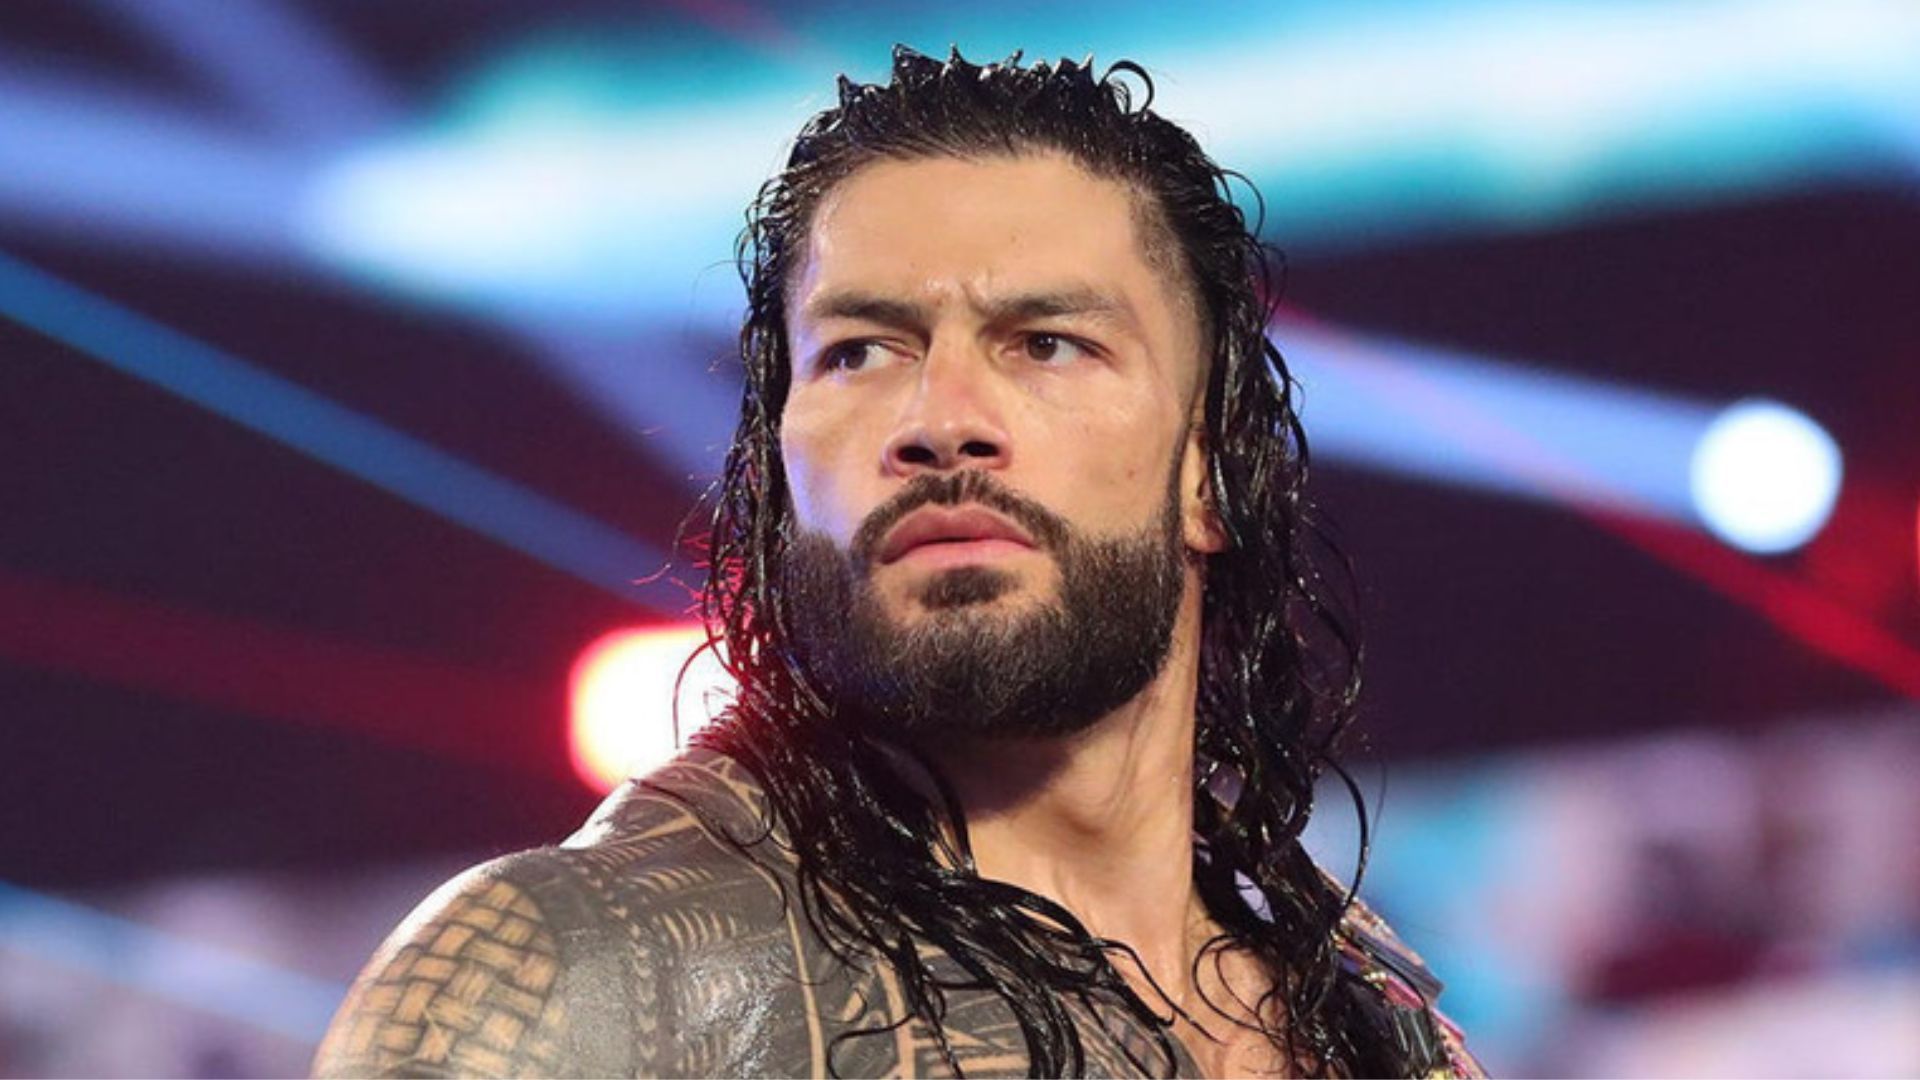 Roman Reigns during a match. Image Credits: X